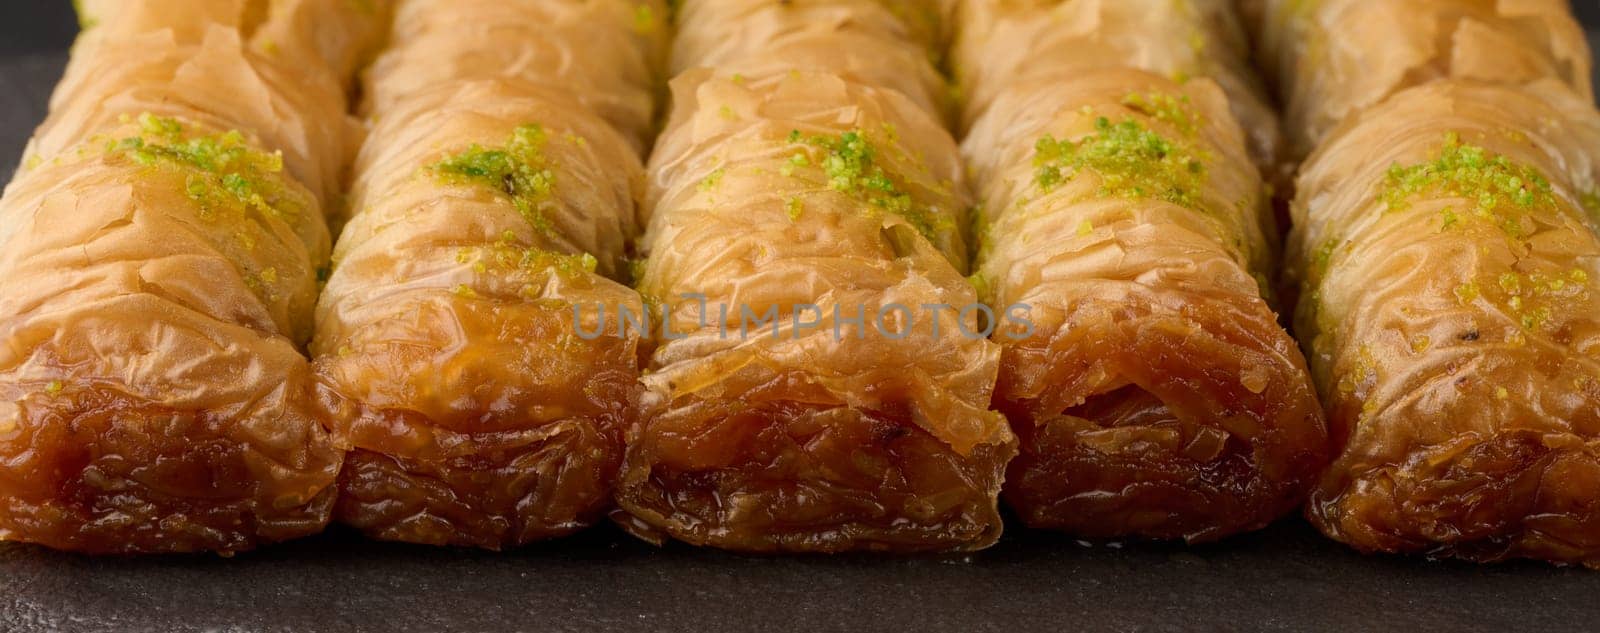 Pieces of baked baklava in honey and sprinkled with pistachios on a black board, close up